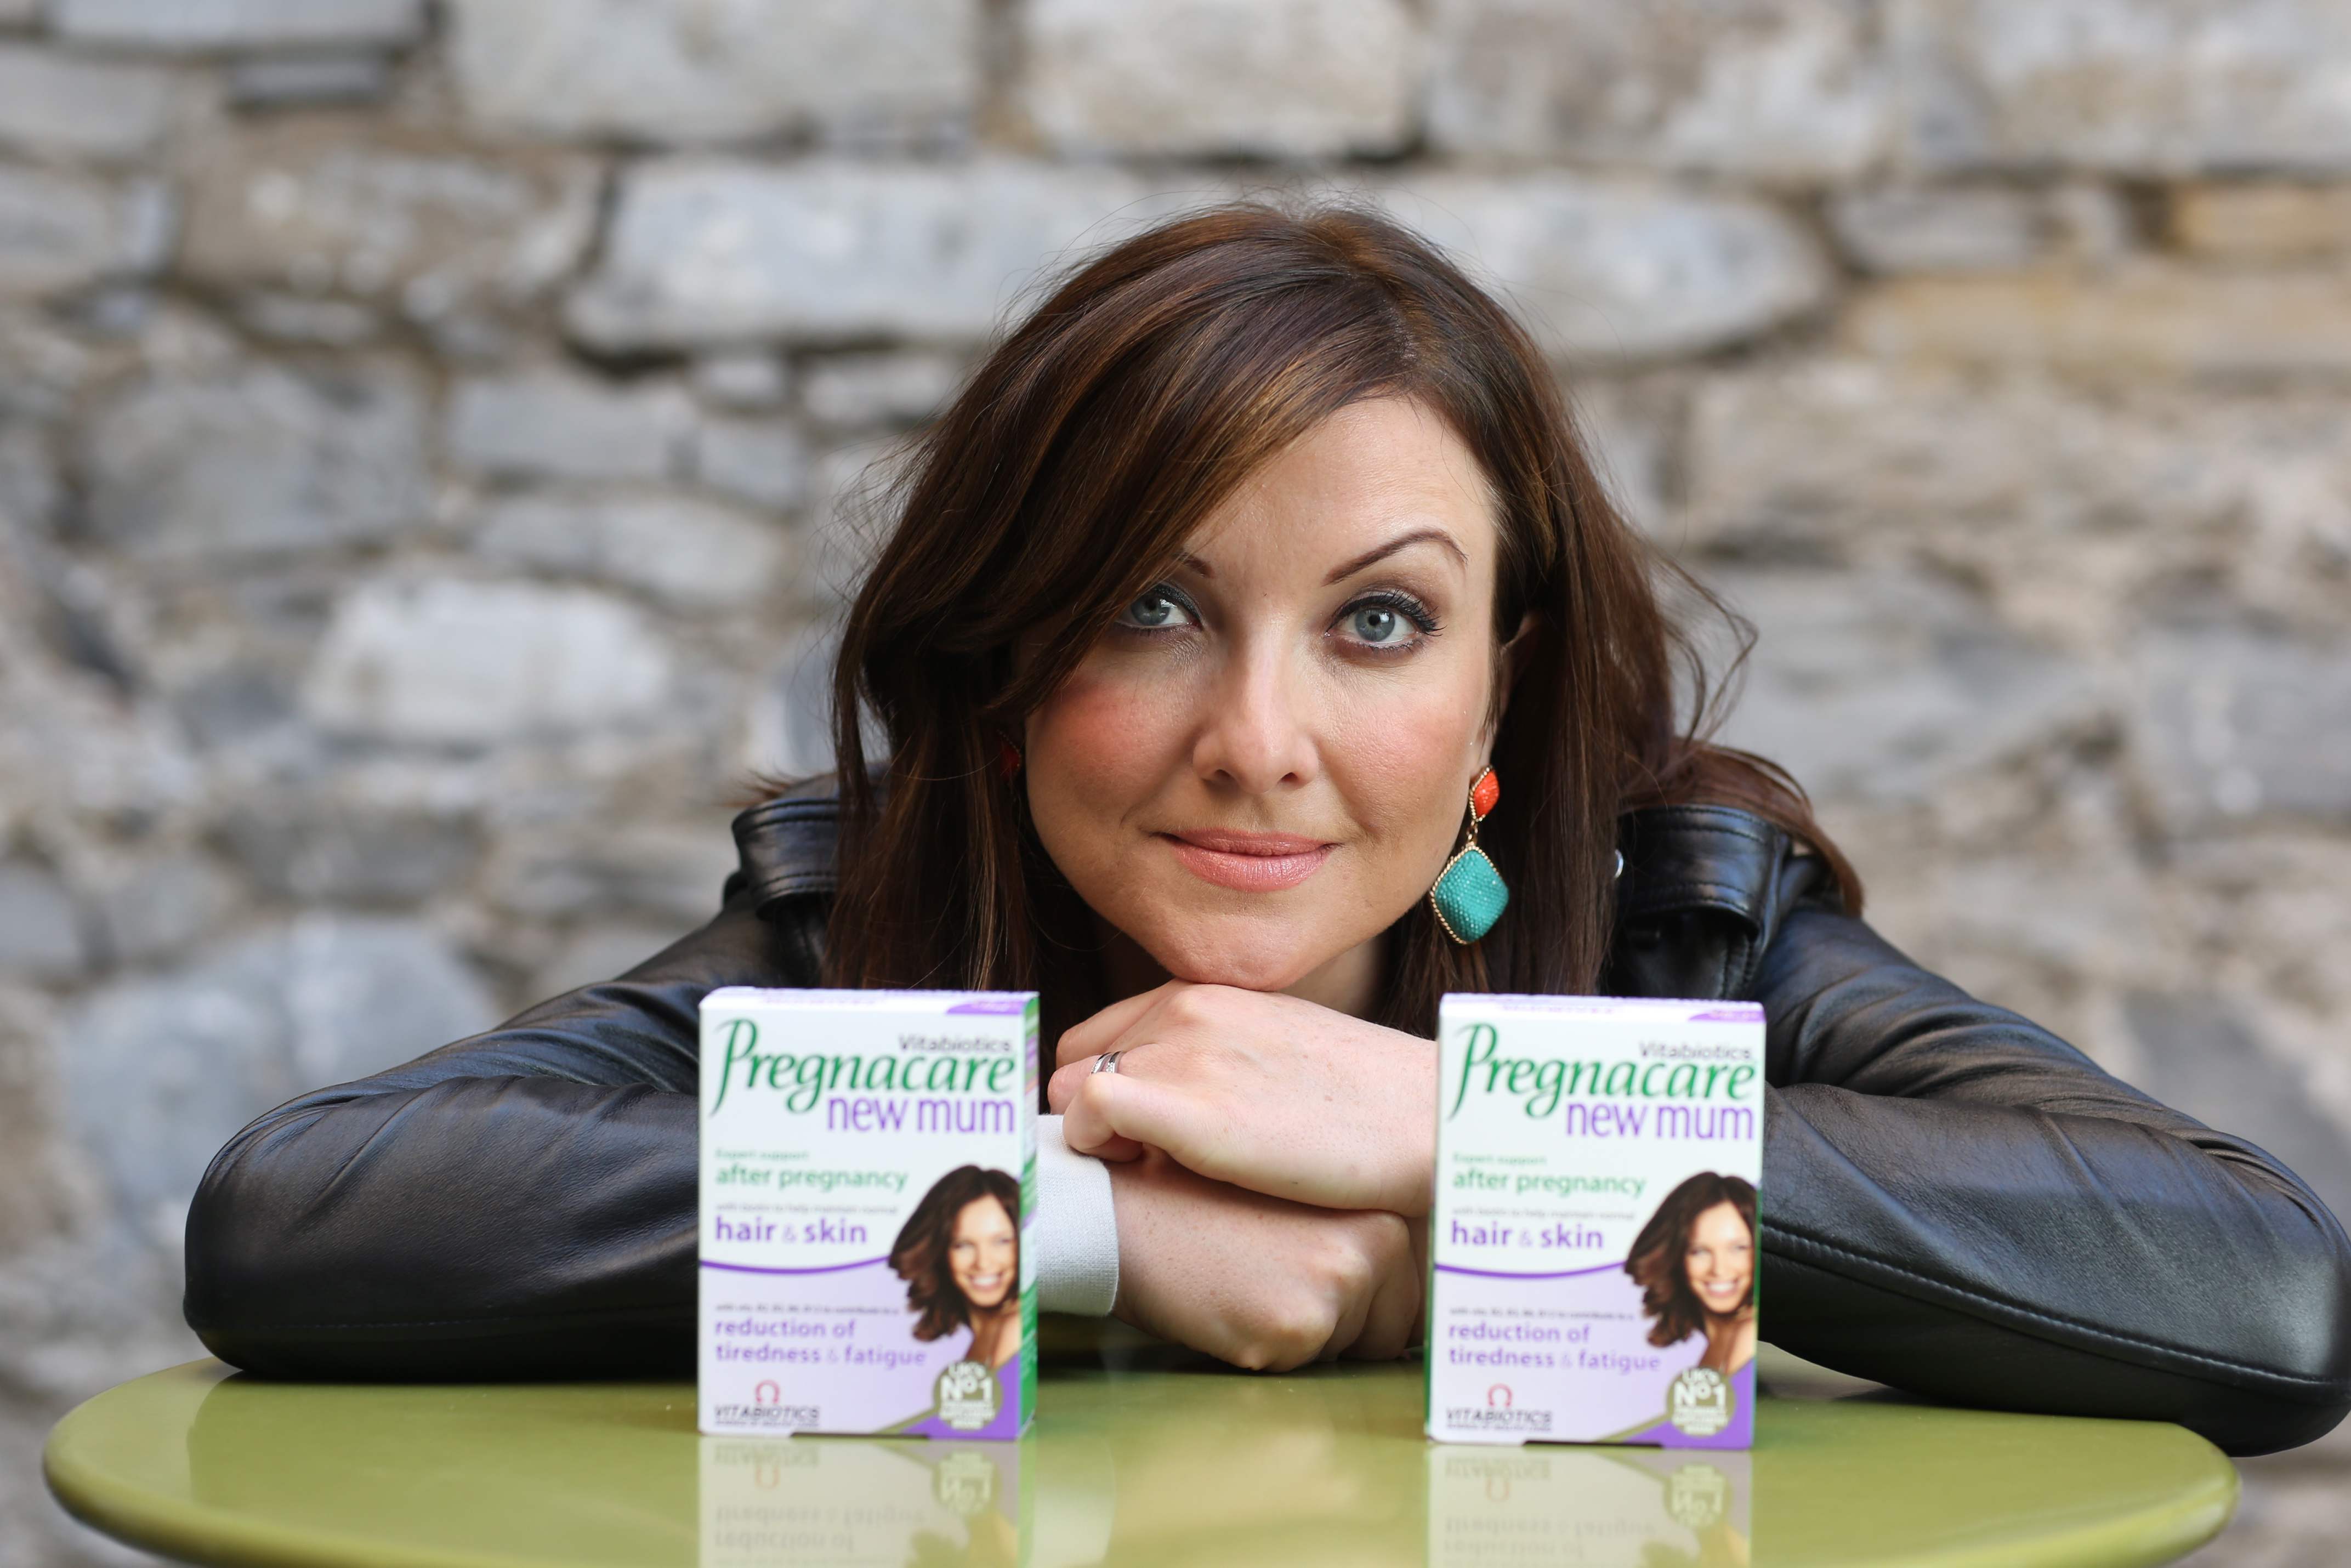 Repro Free Tuesday 15th September 2015: Only 25% of new mums have reported looking after their own health and wellbeing in the period of time post-pregnancy. This is according to new research commissioned by Pregnacare® New Mum, Ireland?s number one pregnancy supplement brand. The research has been conducted in an effort to remind new mums of the importance of managing their own health and wellbeing so that they can best care and nurture their baby. The research was launched by Jennifer Maguire, TV personality, RTE 2fm host and Pregnacare® New Mum ambassador, who gave birth to Florence Zamparelli Dublin in March 2015. For more information visit: www.pregnacare.ie. Picture Jason Clarke.